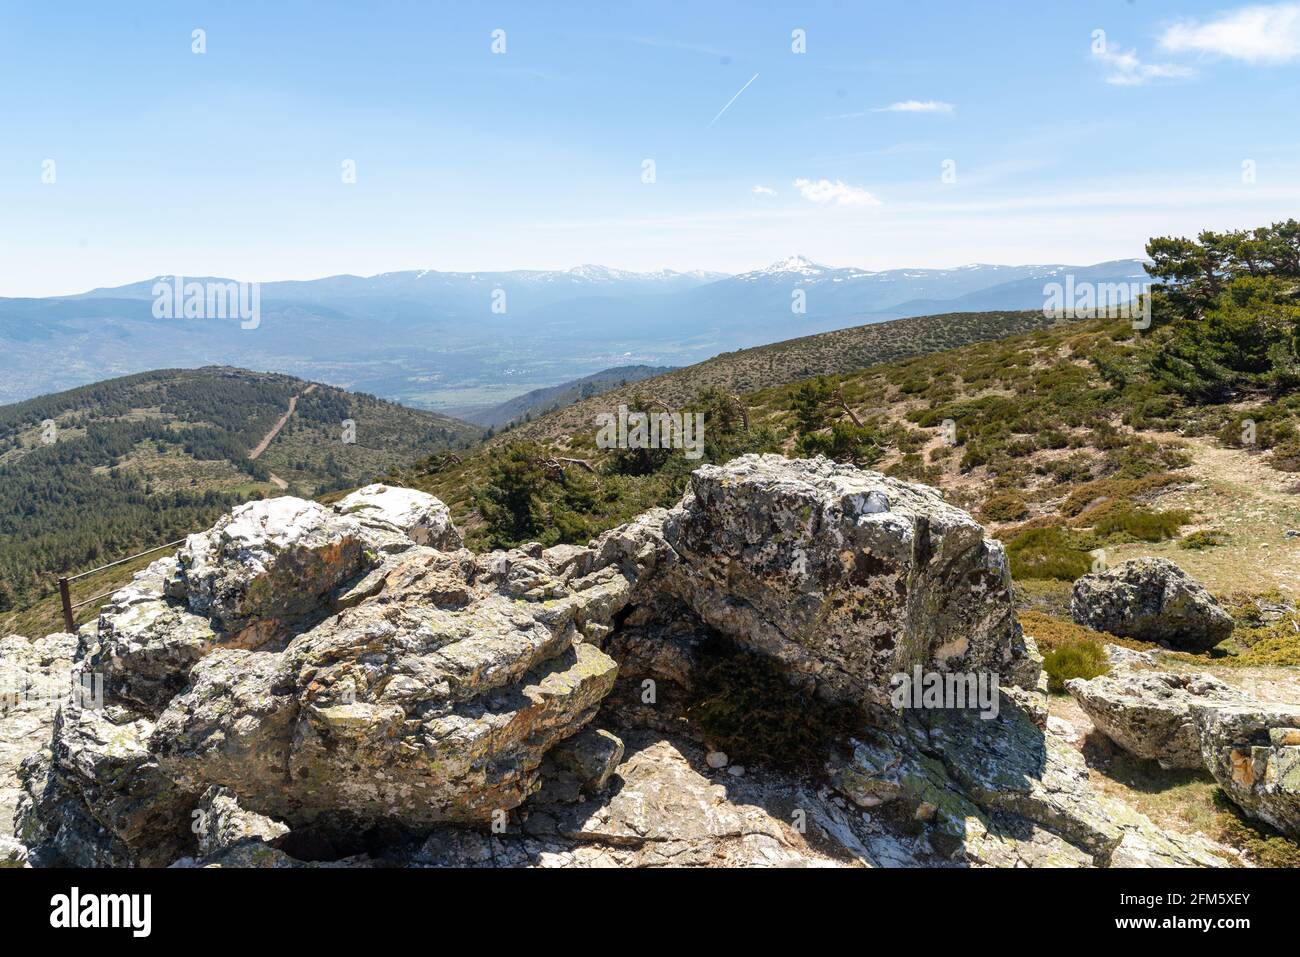 Landscape of rocks and mountains with clear sky in spring Stock Photo